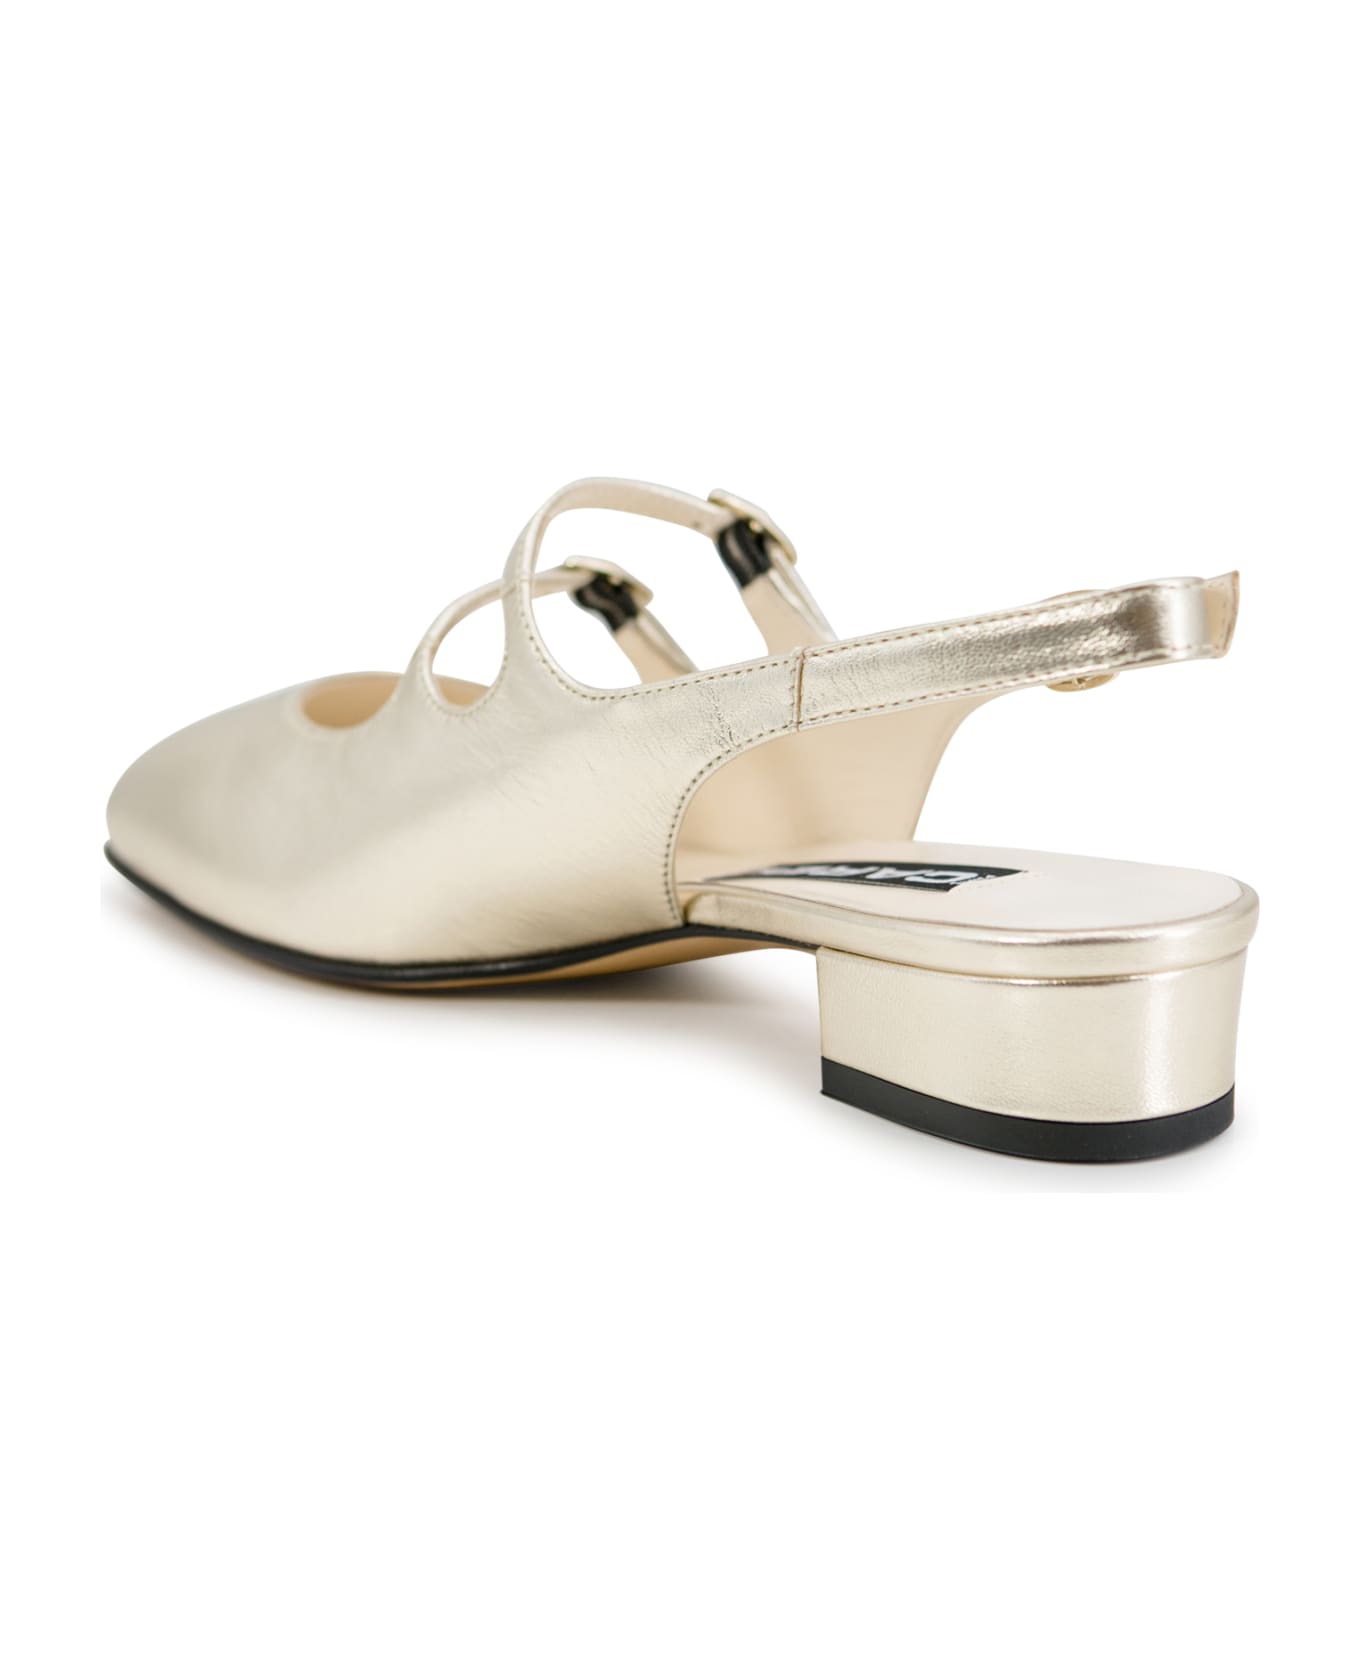 Carel Peche Patent-leather Slingback Pumps - Silver ハイヒール